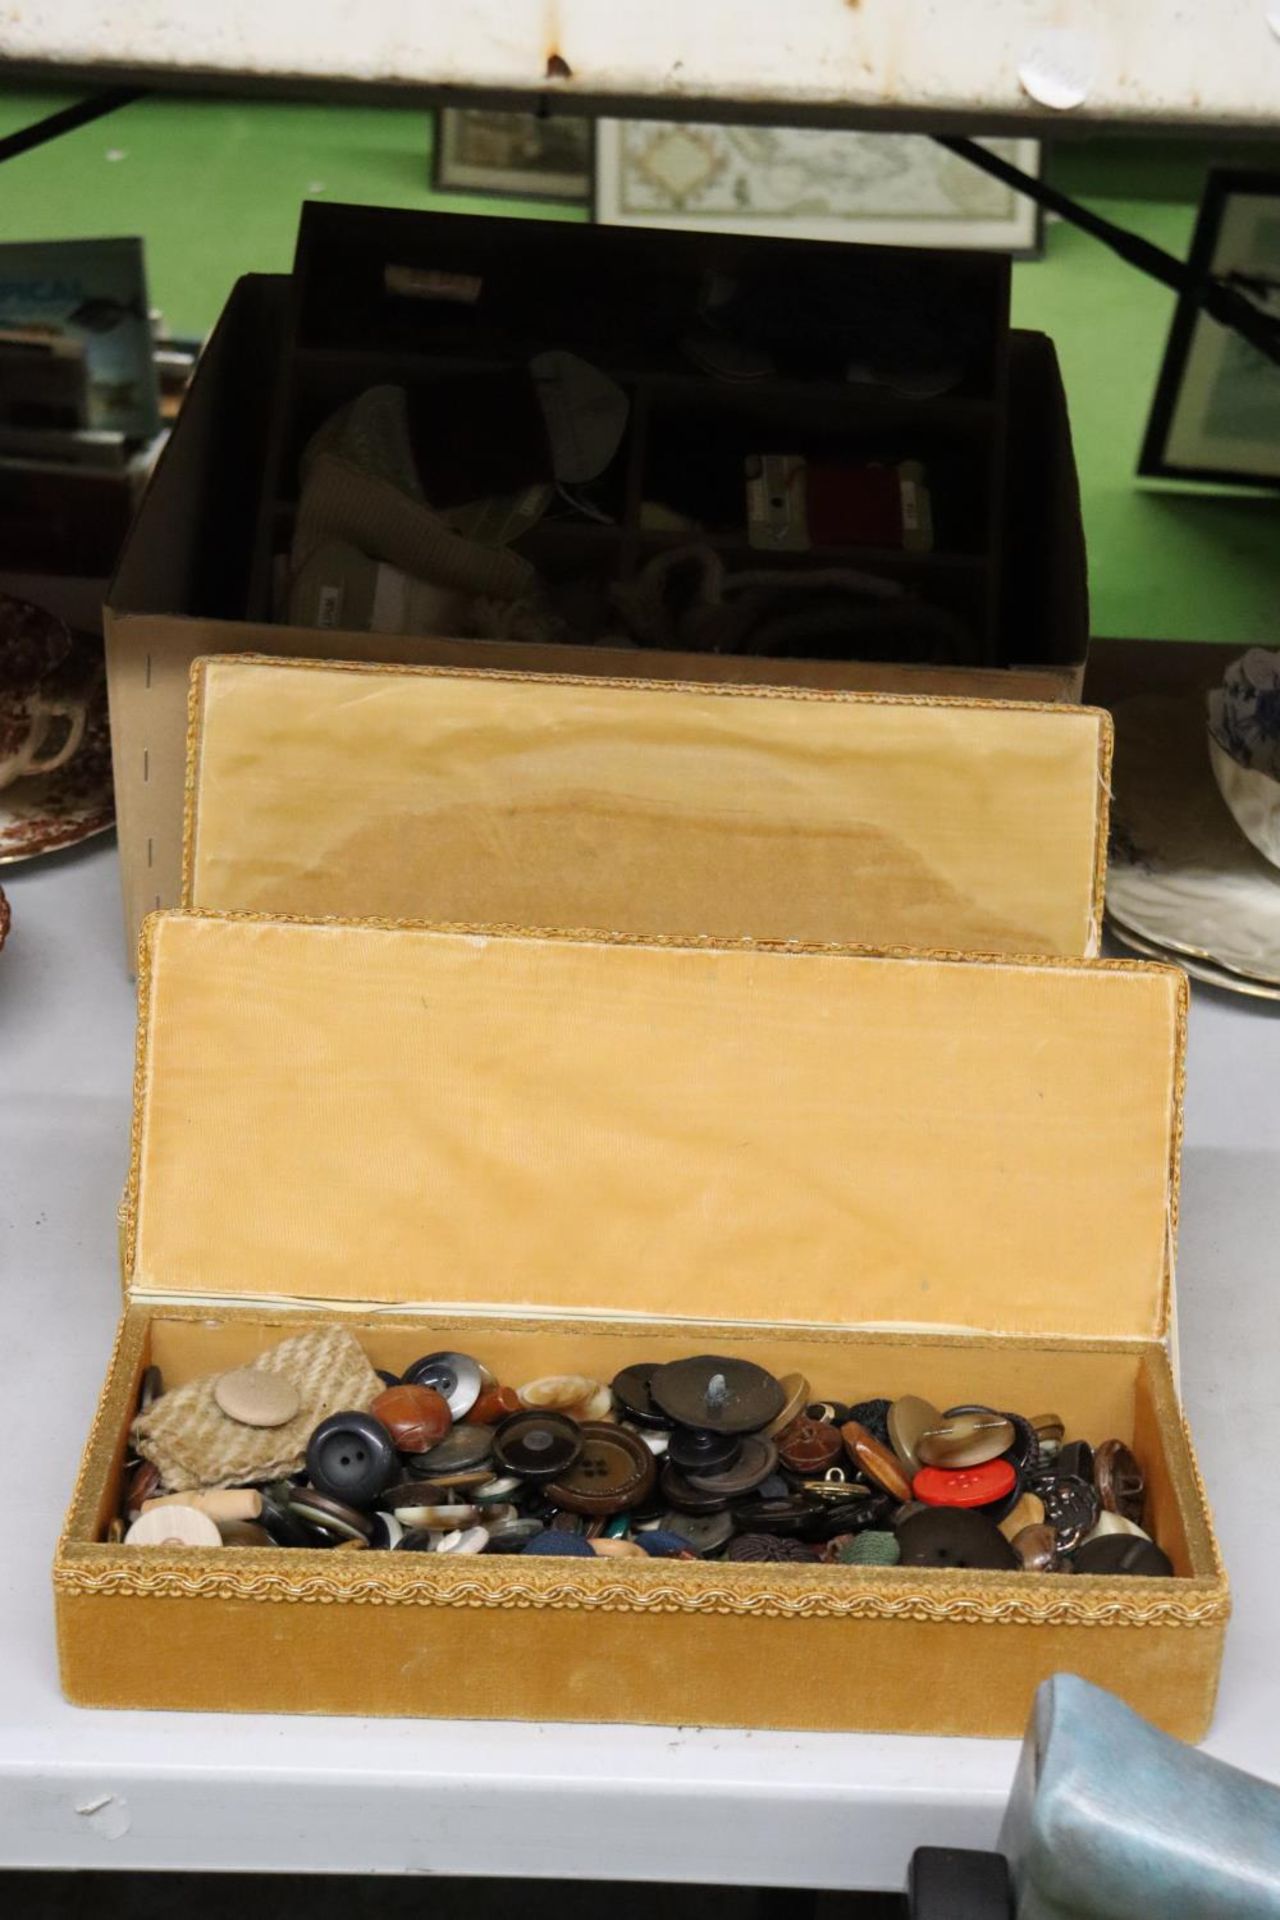 A LARGE QUANTITY OF VINTAGE BUTTONS IN BOXES PLUS HABERDASHERY ITEMS